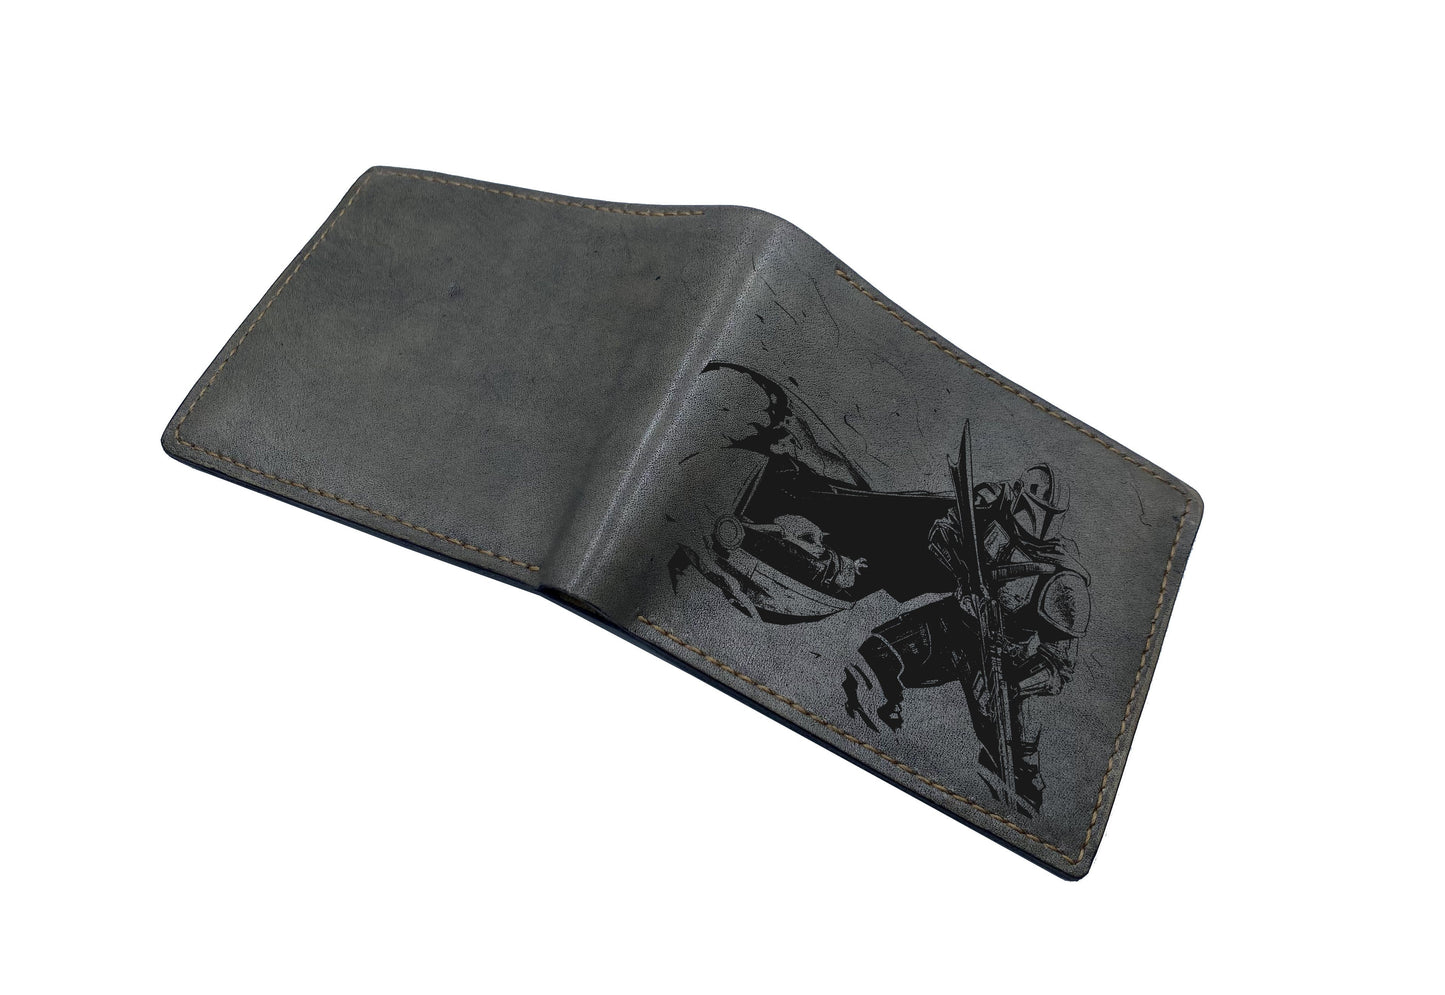 Starwars leather wallet for dad, The Mandalorian drawing art wallet, bifold leather wallet, christmas gift ideas for him